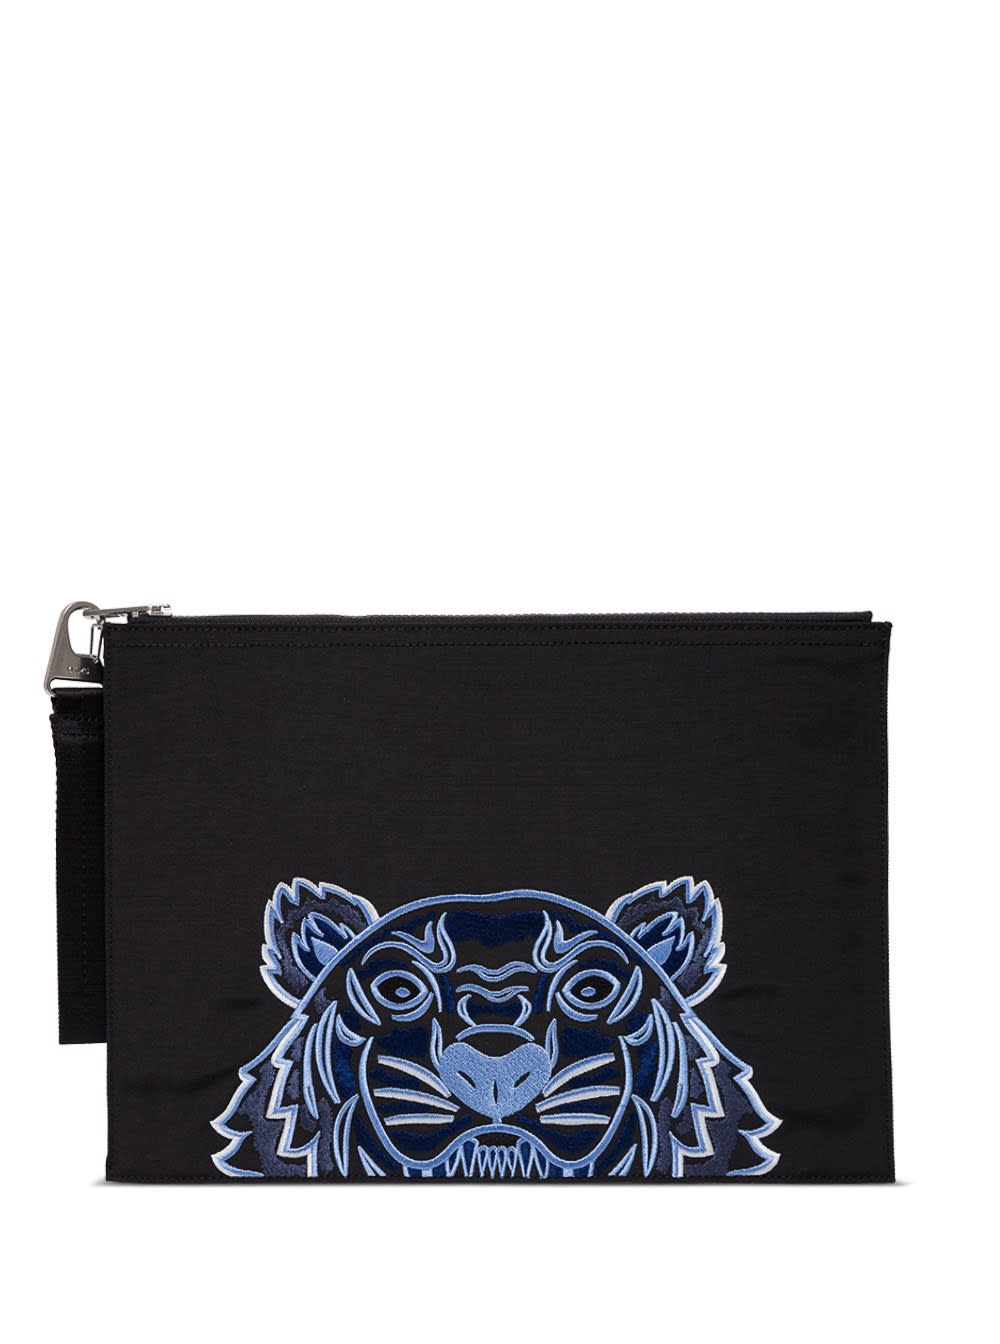 Kenzo Black Fabric Clutch With Tiger Embroidery